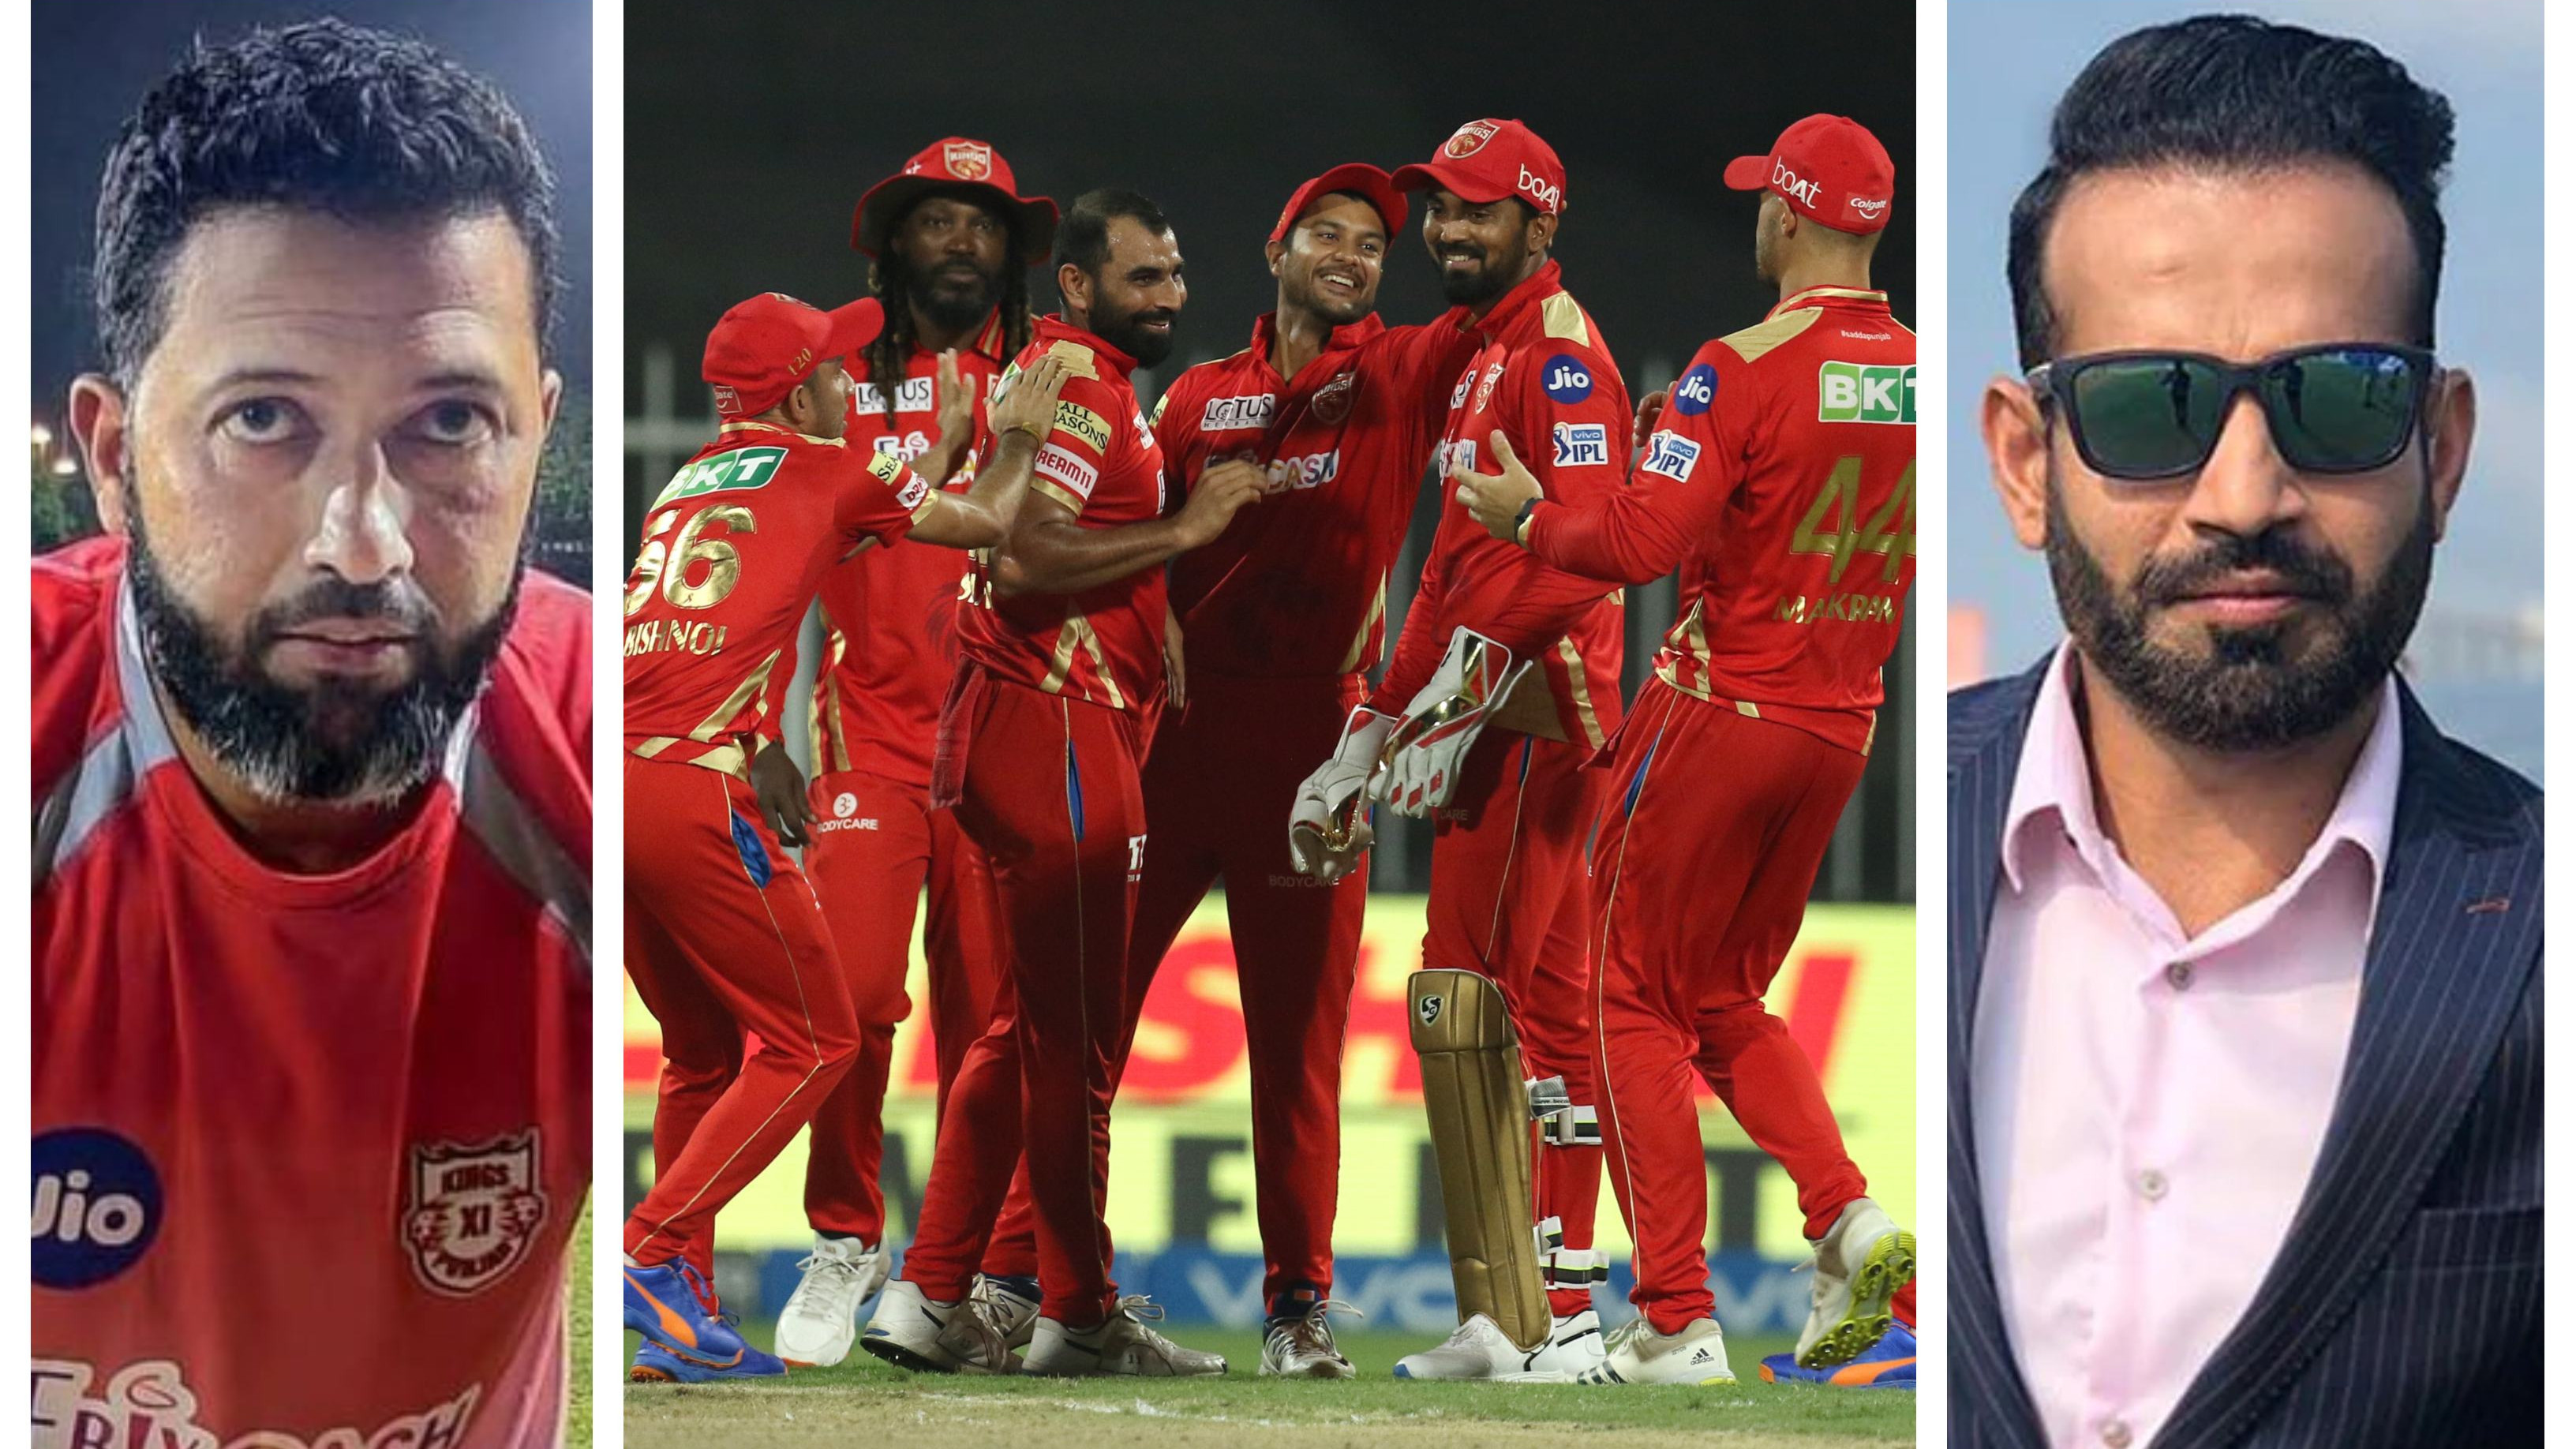 IPL 2021: Cricket fraternity reacts as PBKS defeat SRH in a low-scoring thriller 